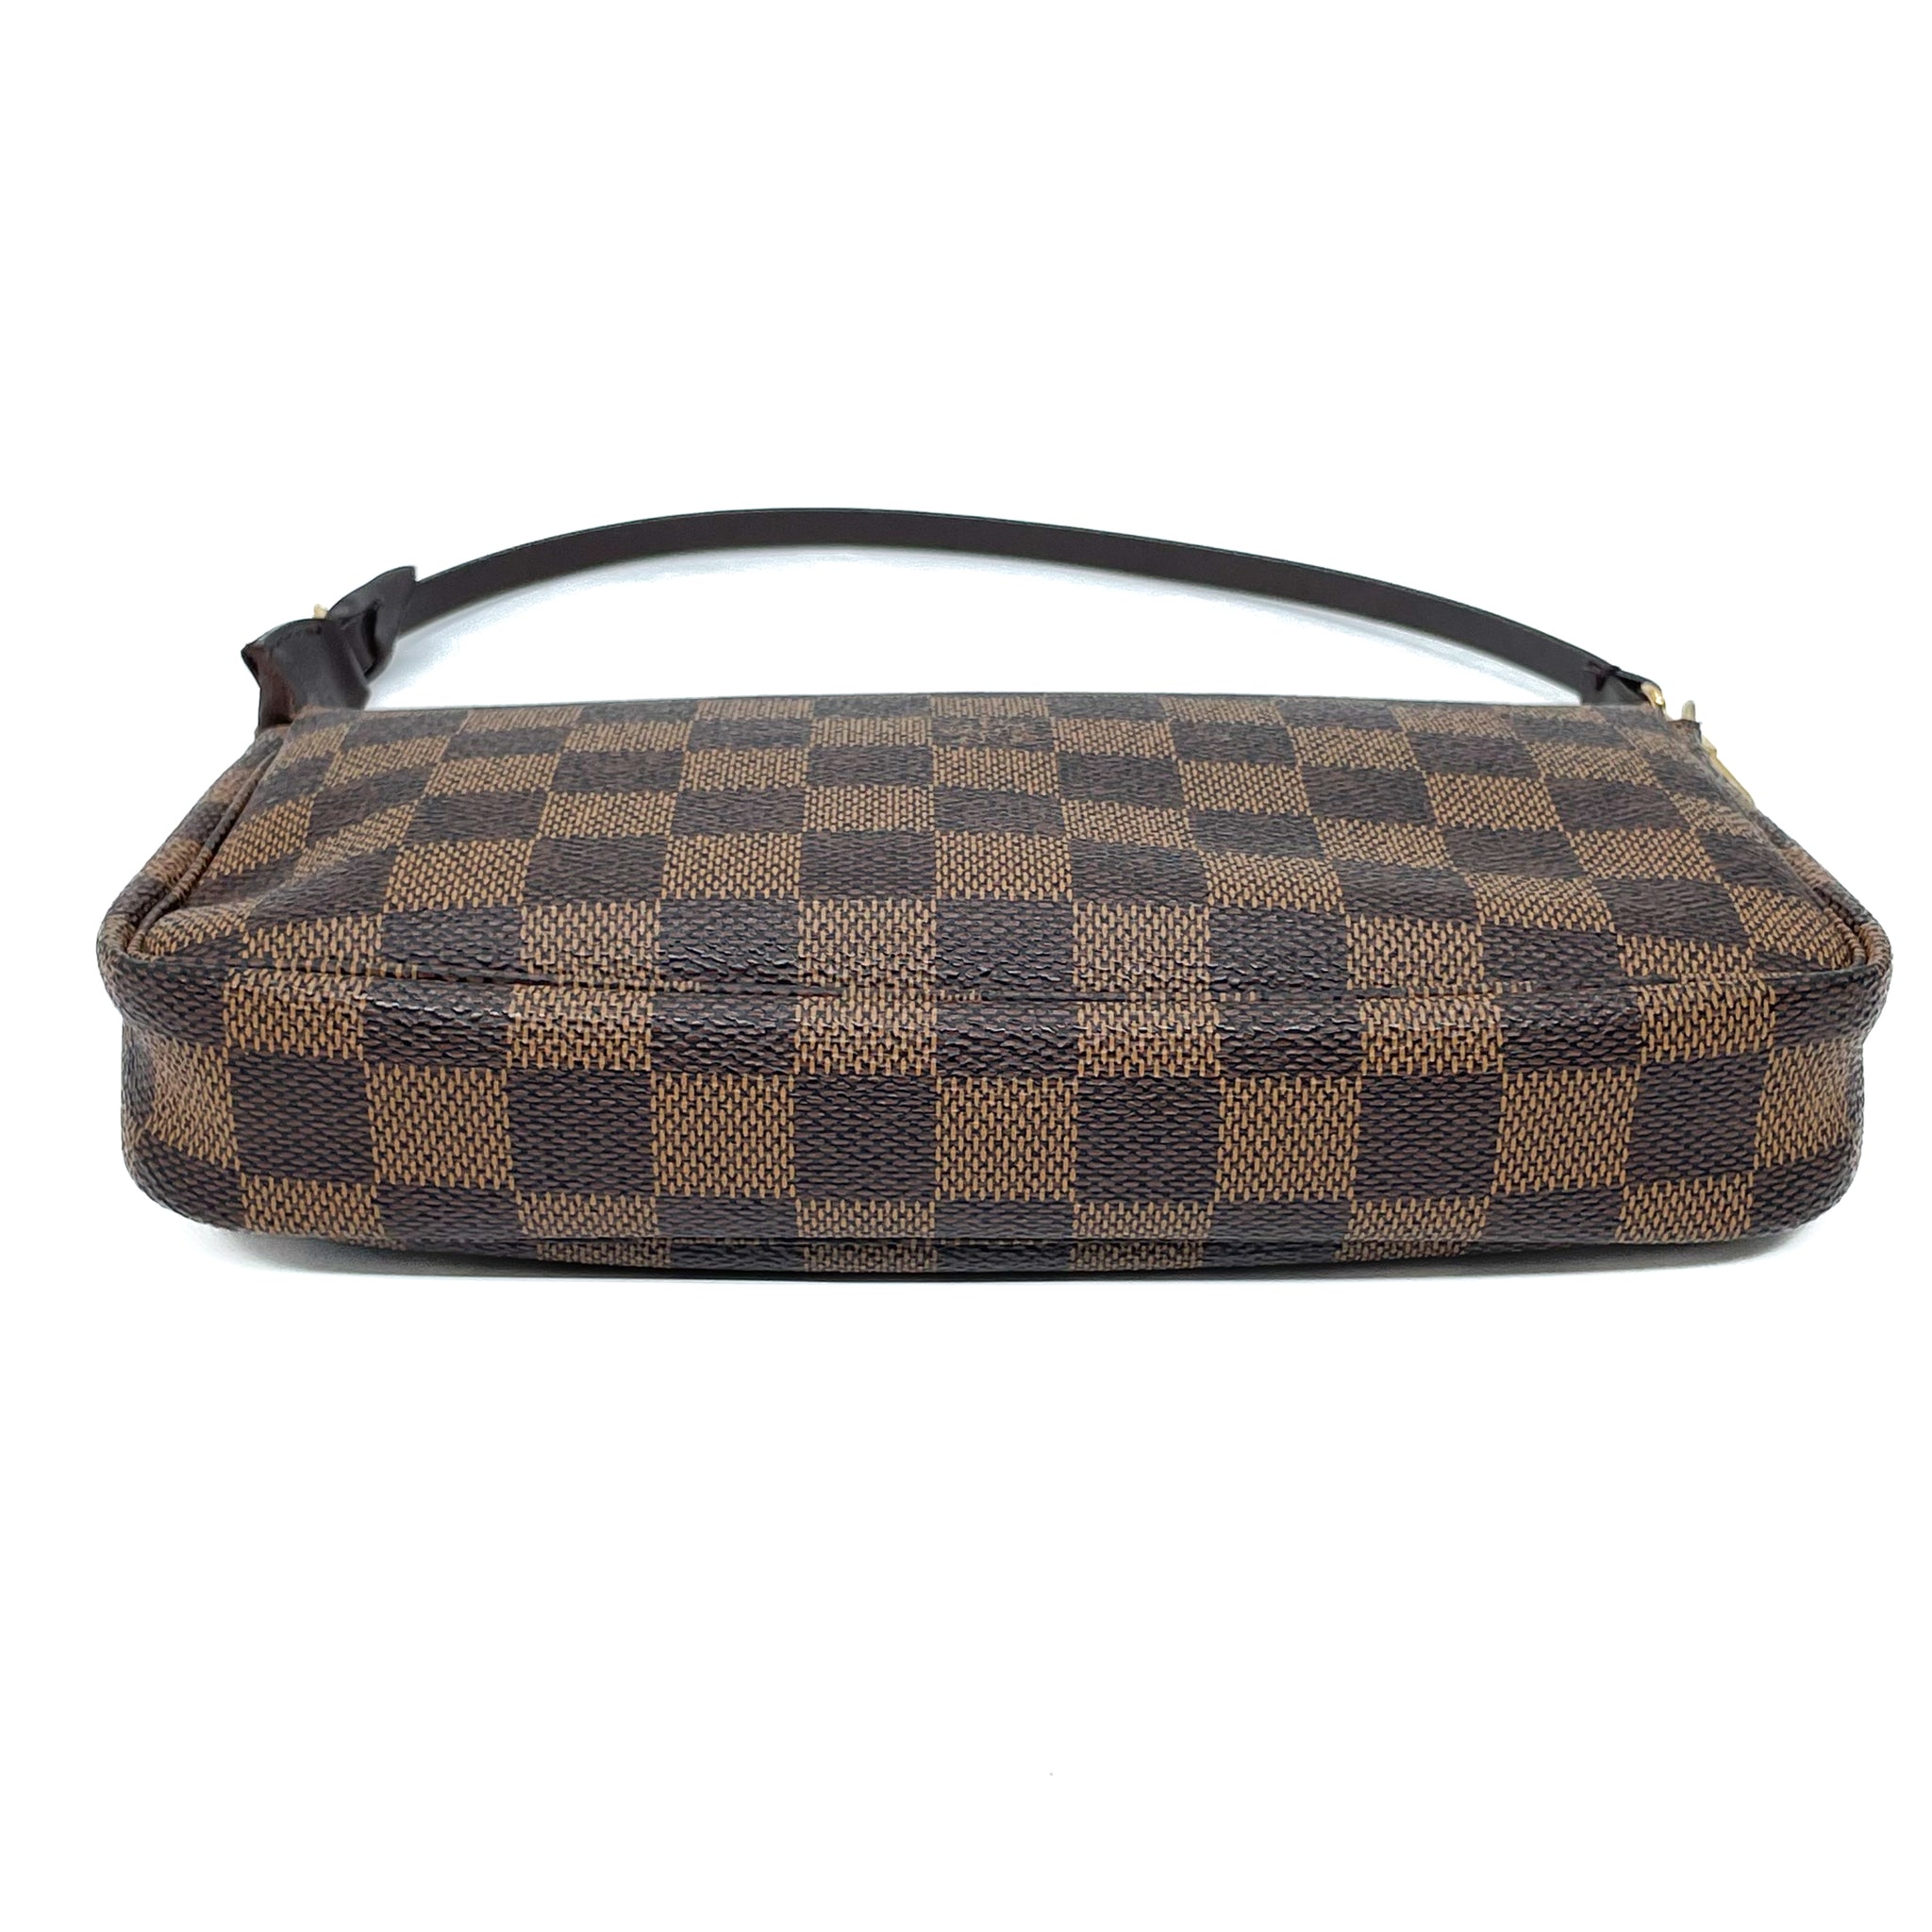 Louis Vuitton Pochette Félicie Bag In Brown Damier Ebene And Studs - Praise  To Heaven